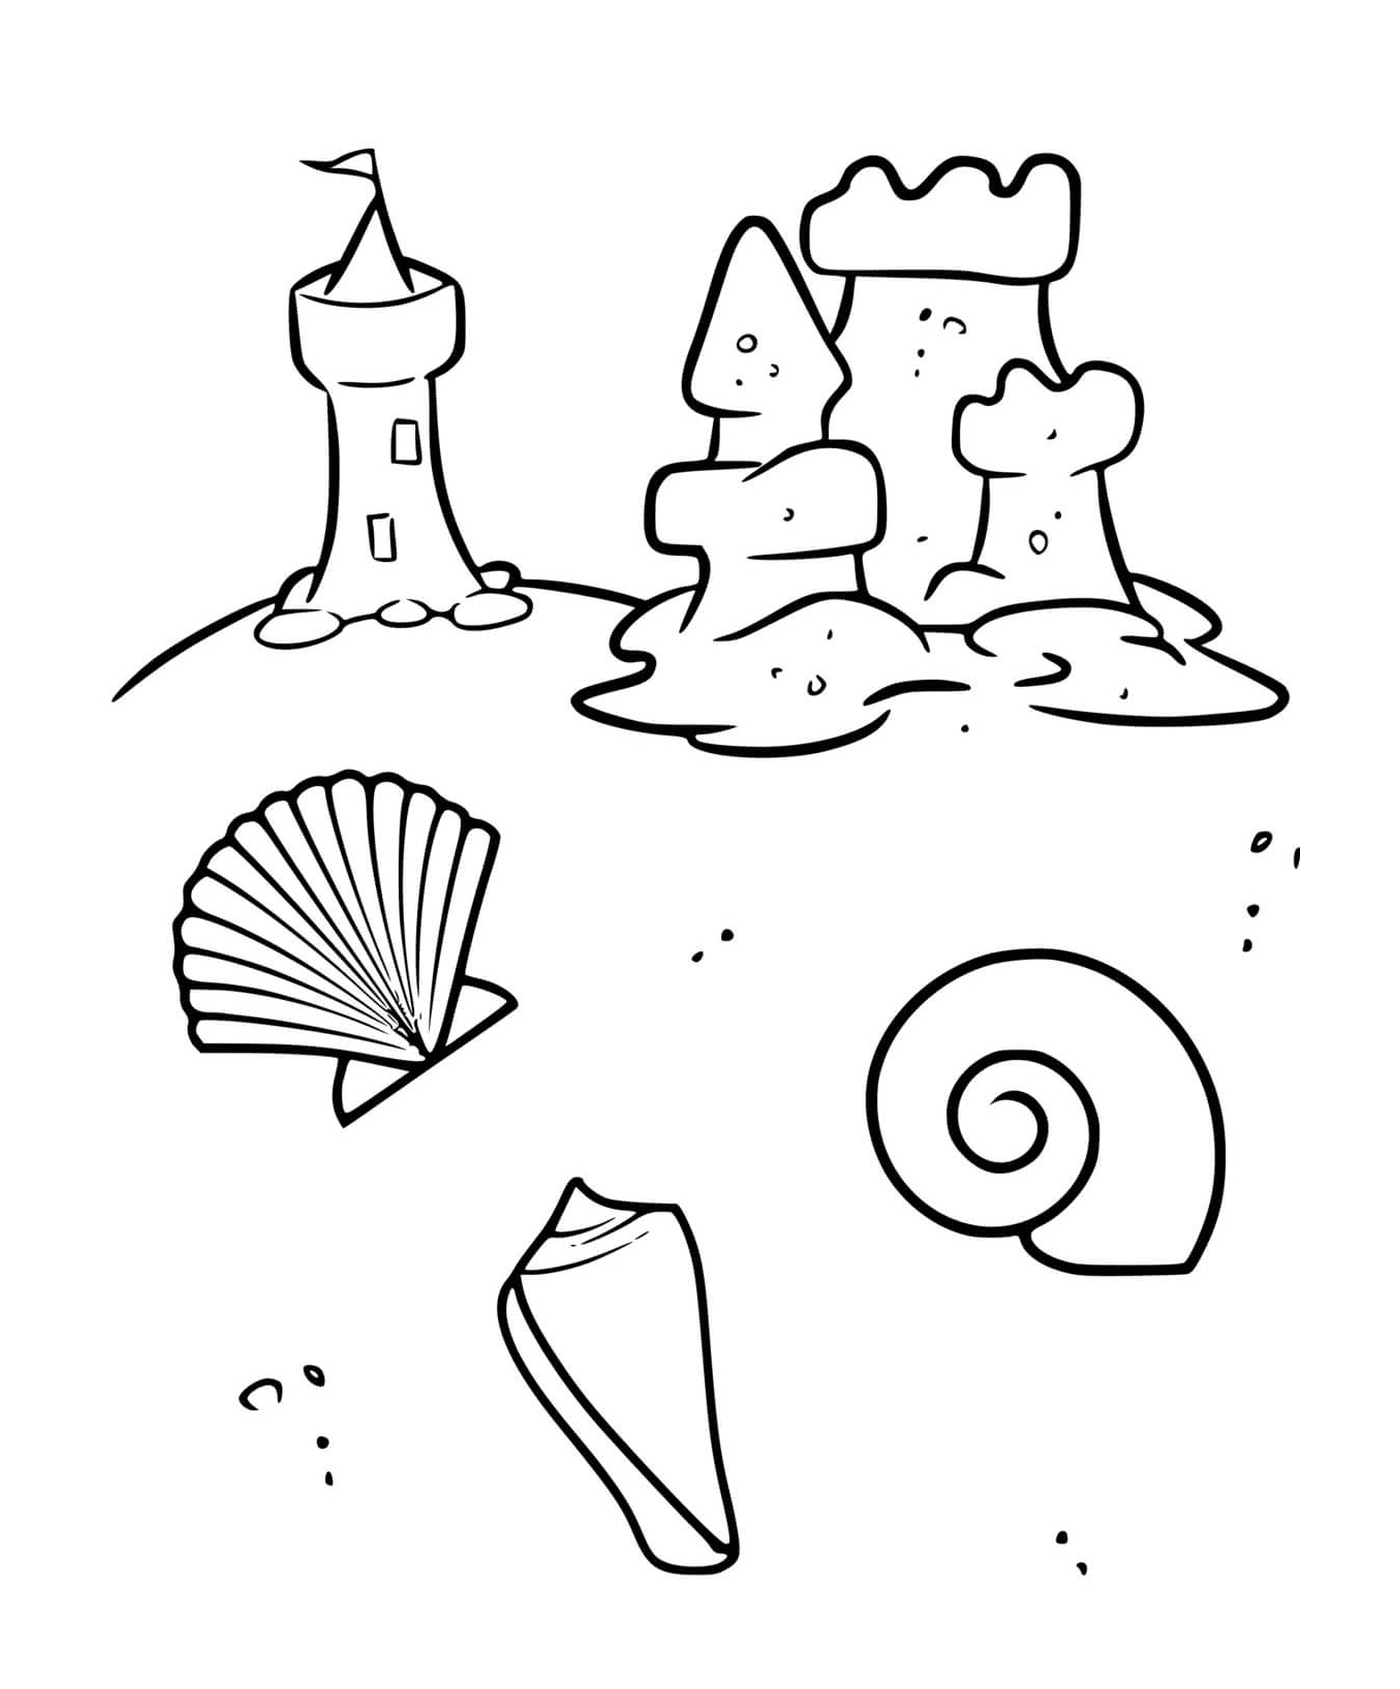  Shells and sand castles 